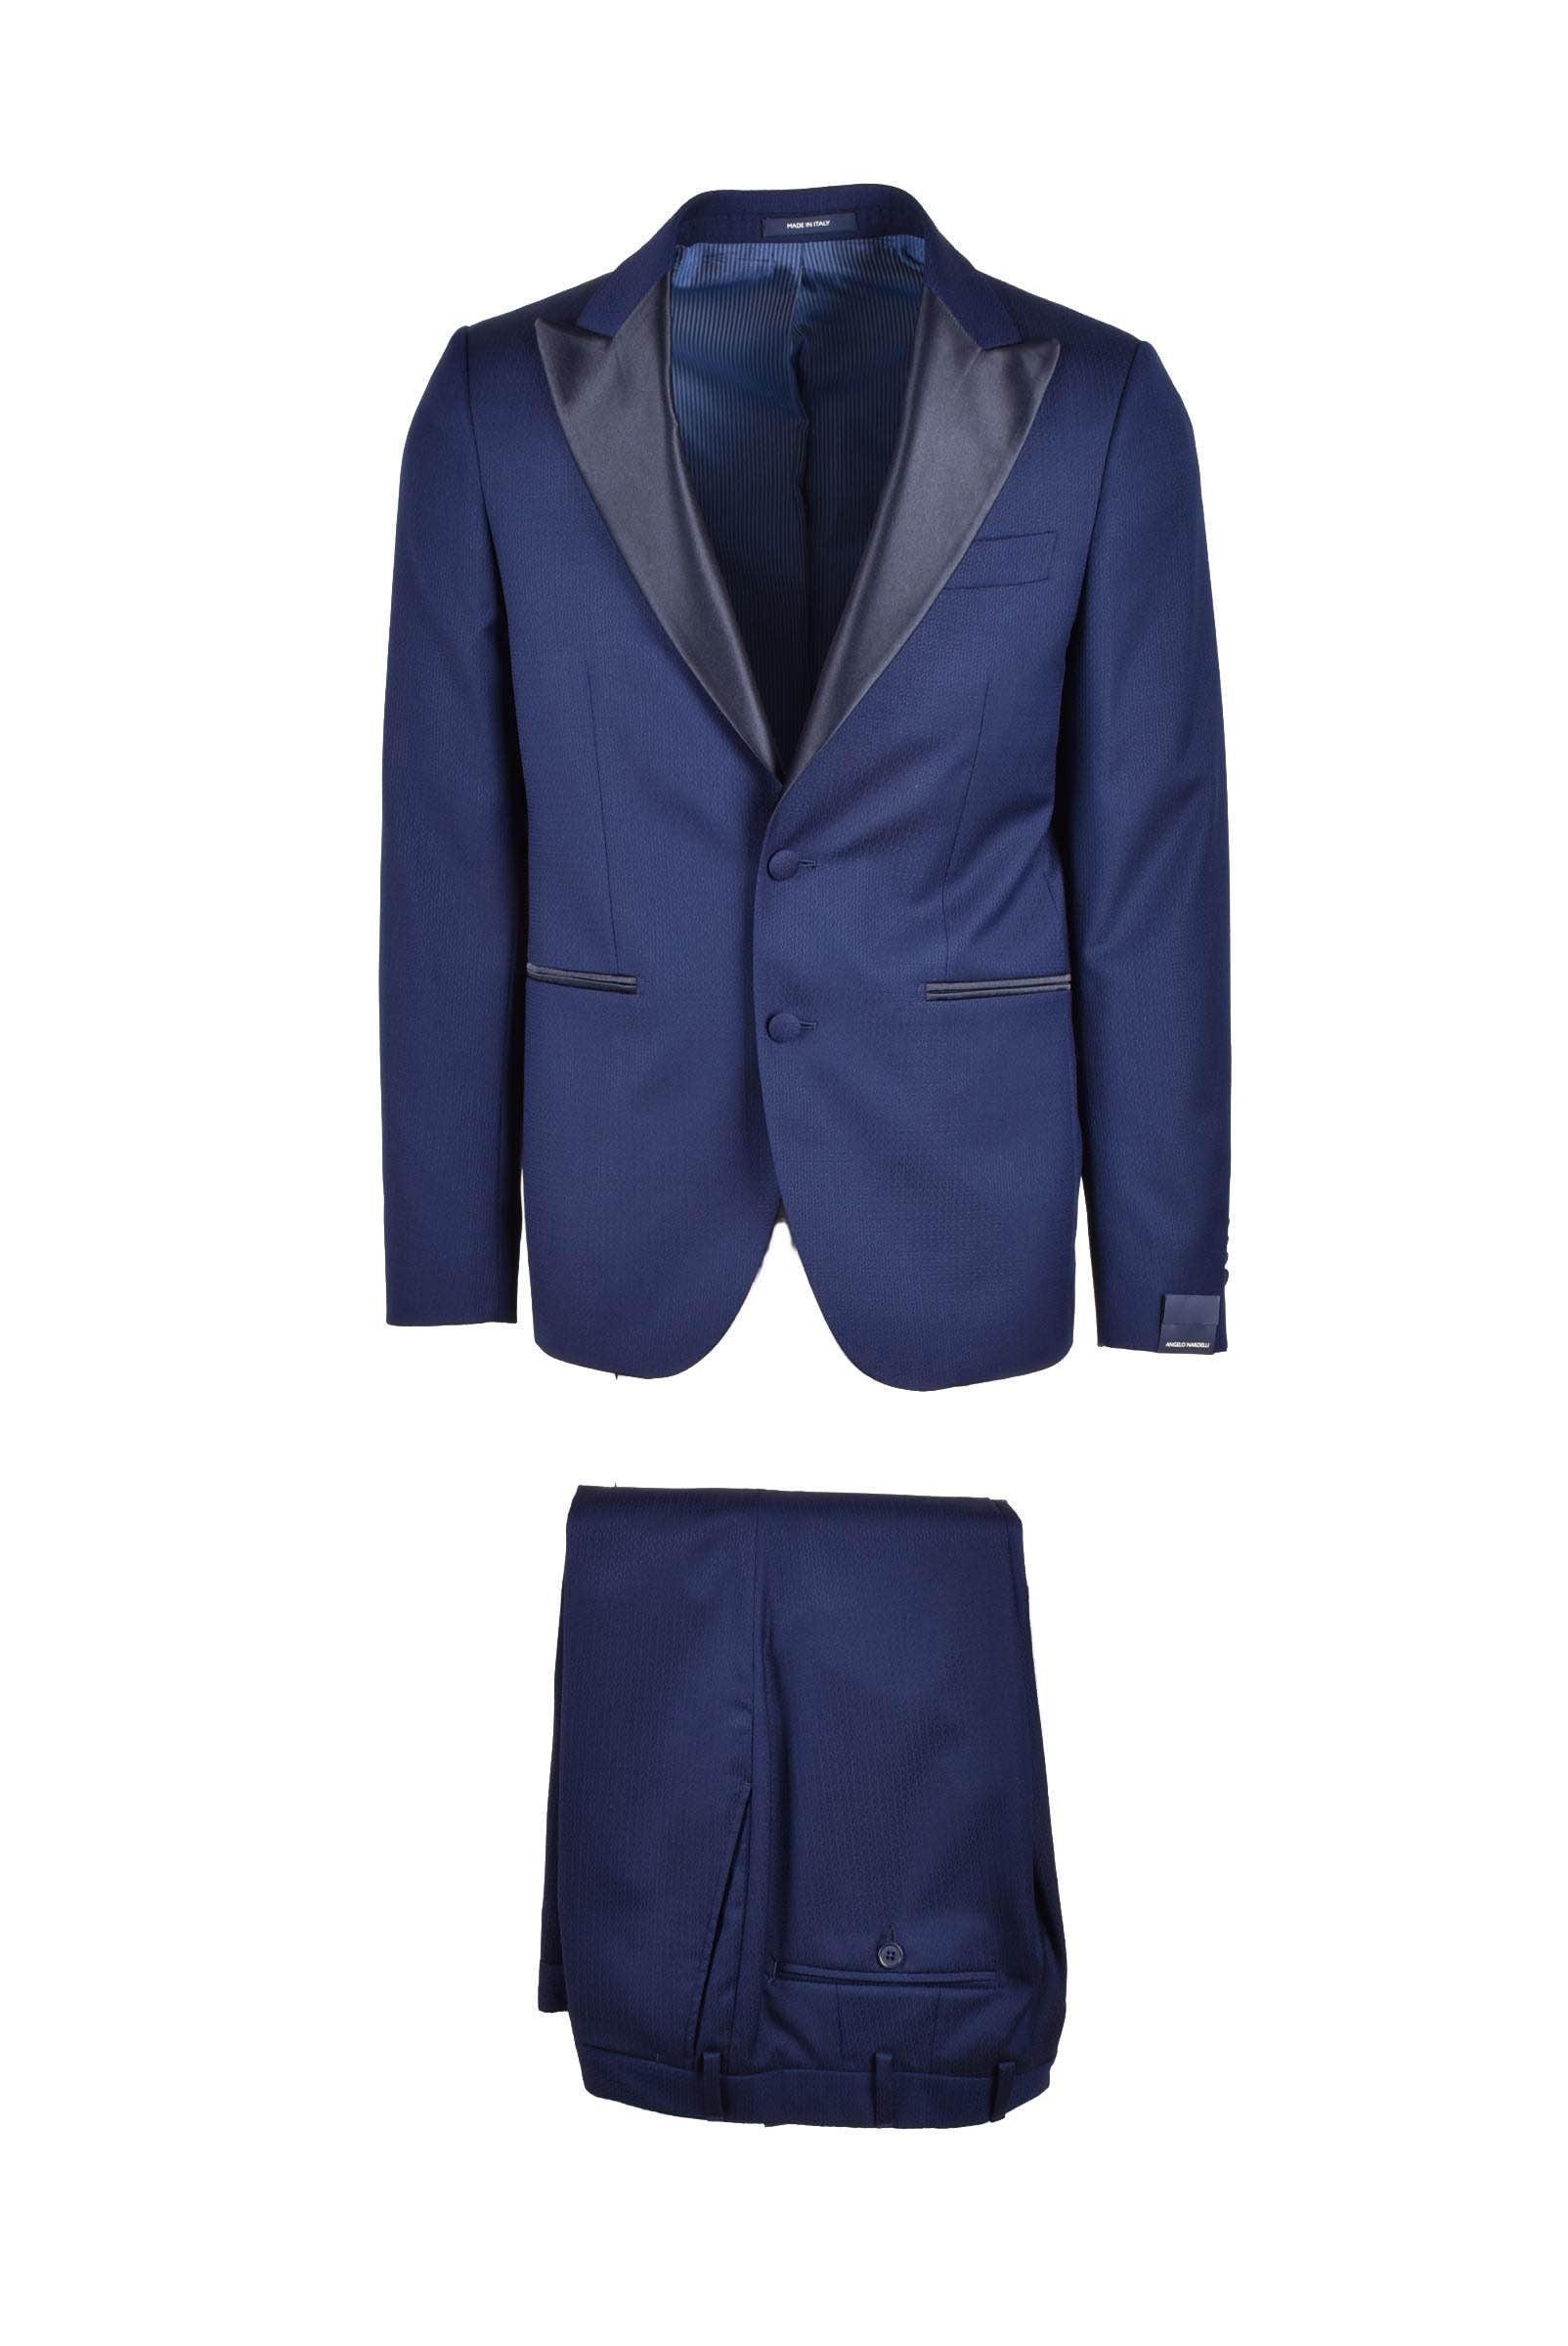 for Men Angelo Nardelli Wool Suit in Dark Blue Mens Clothing Suits Two-piece suits Blue 